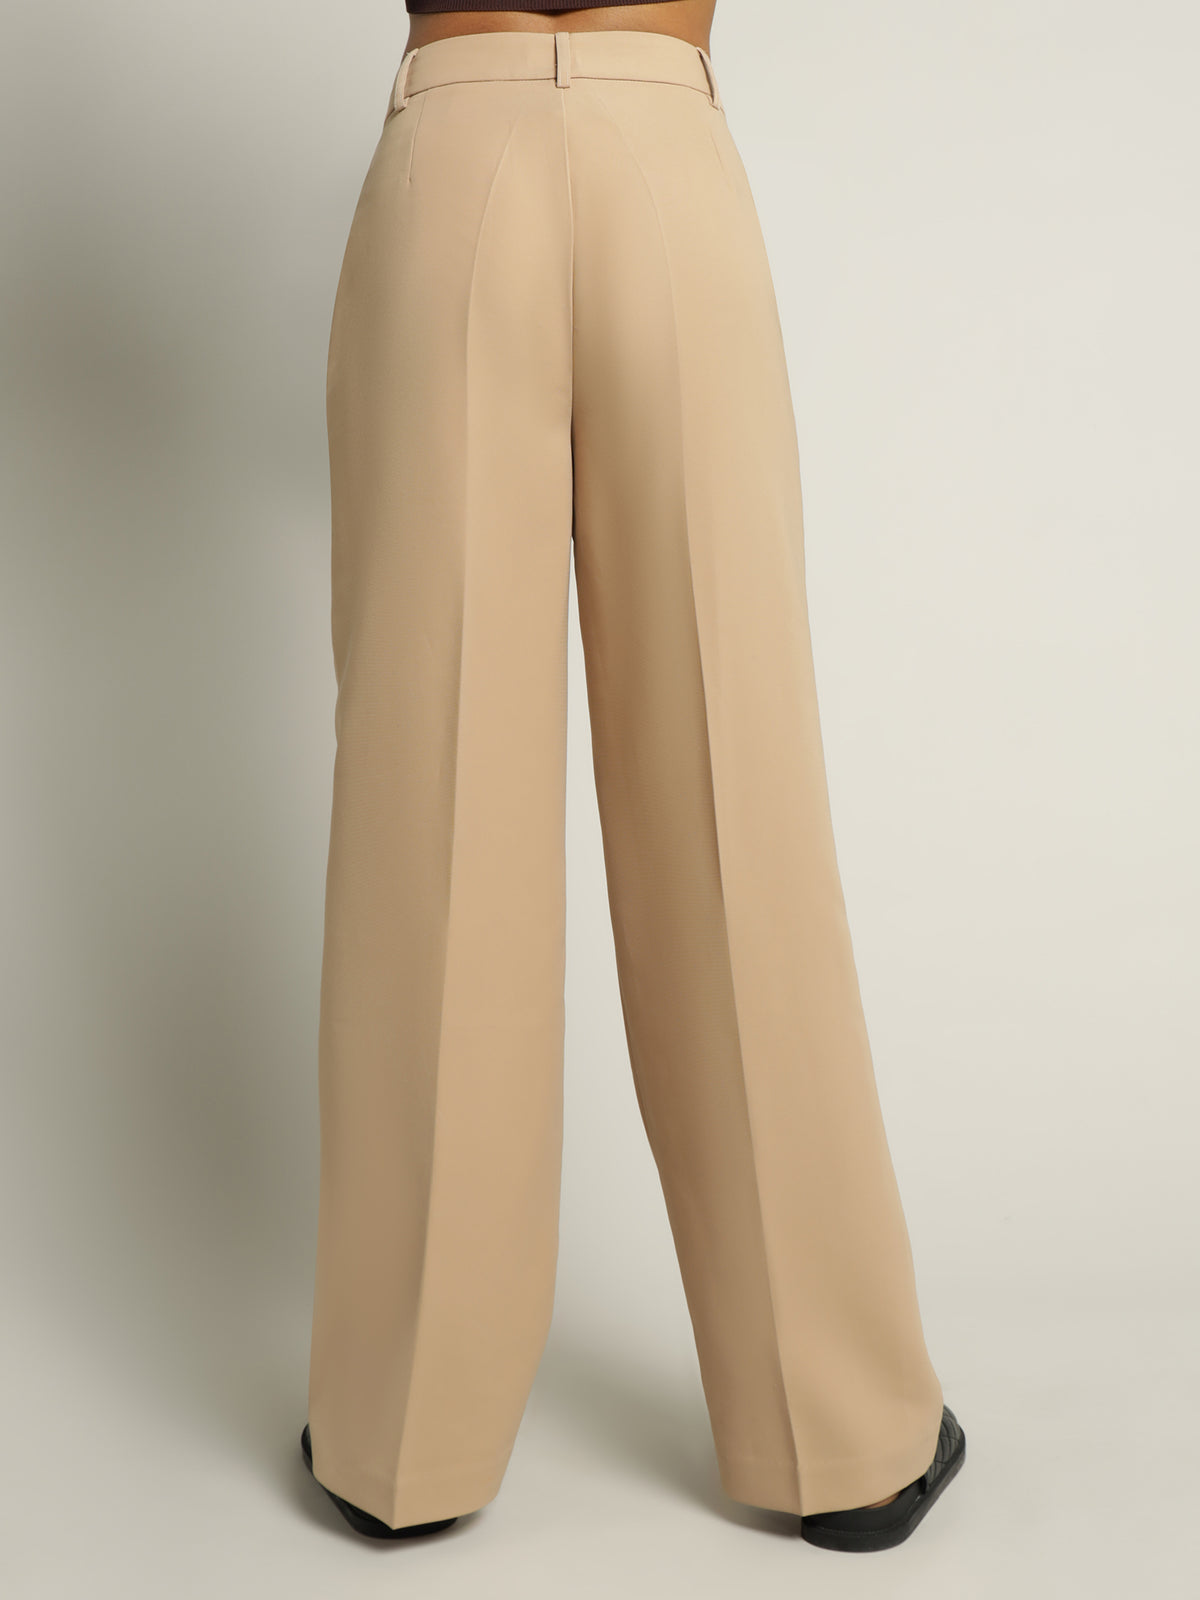 Claudia Longline Tailored Pant in Sand